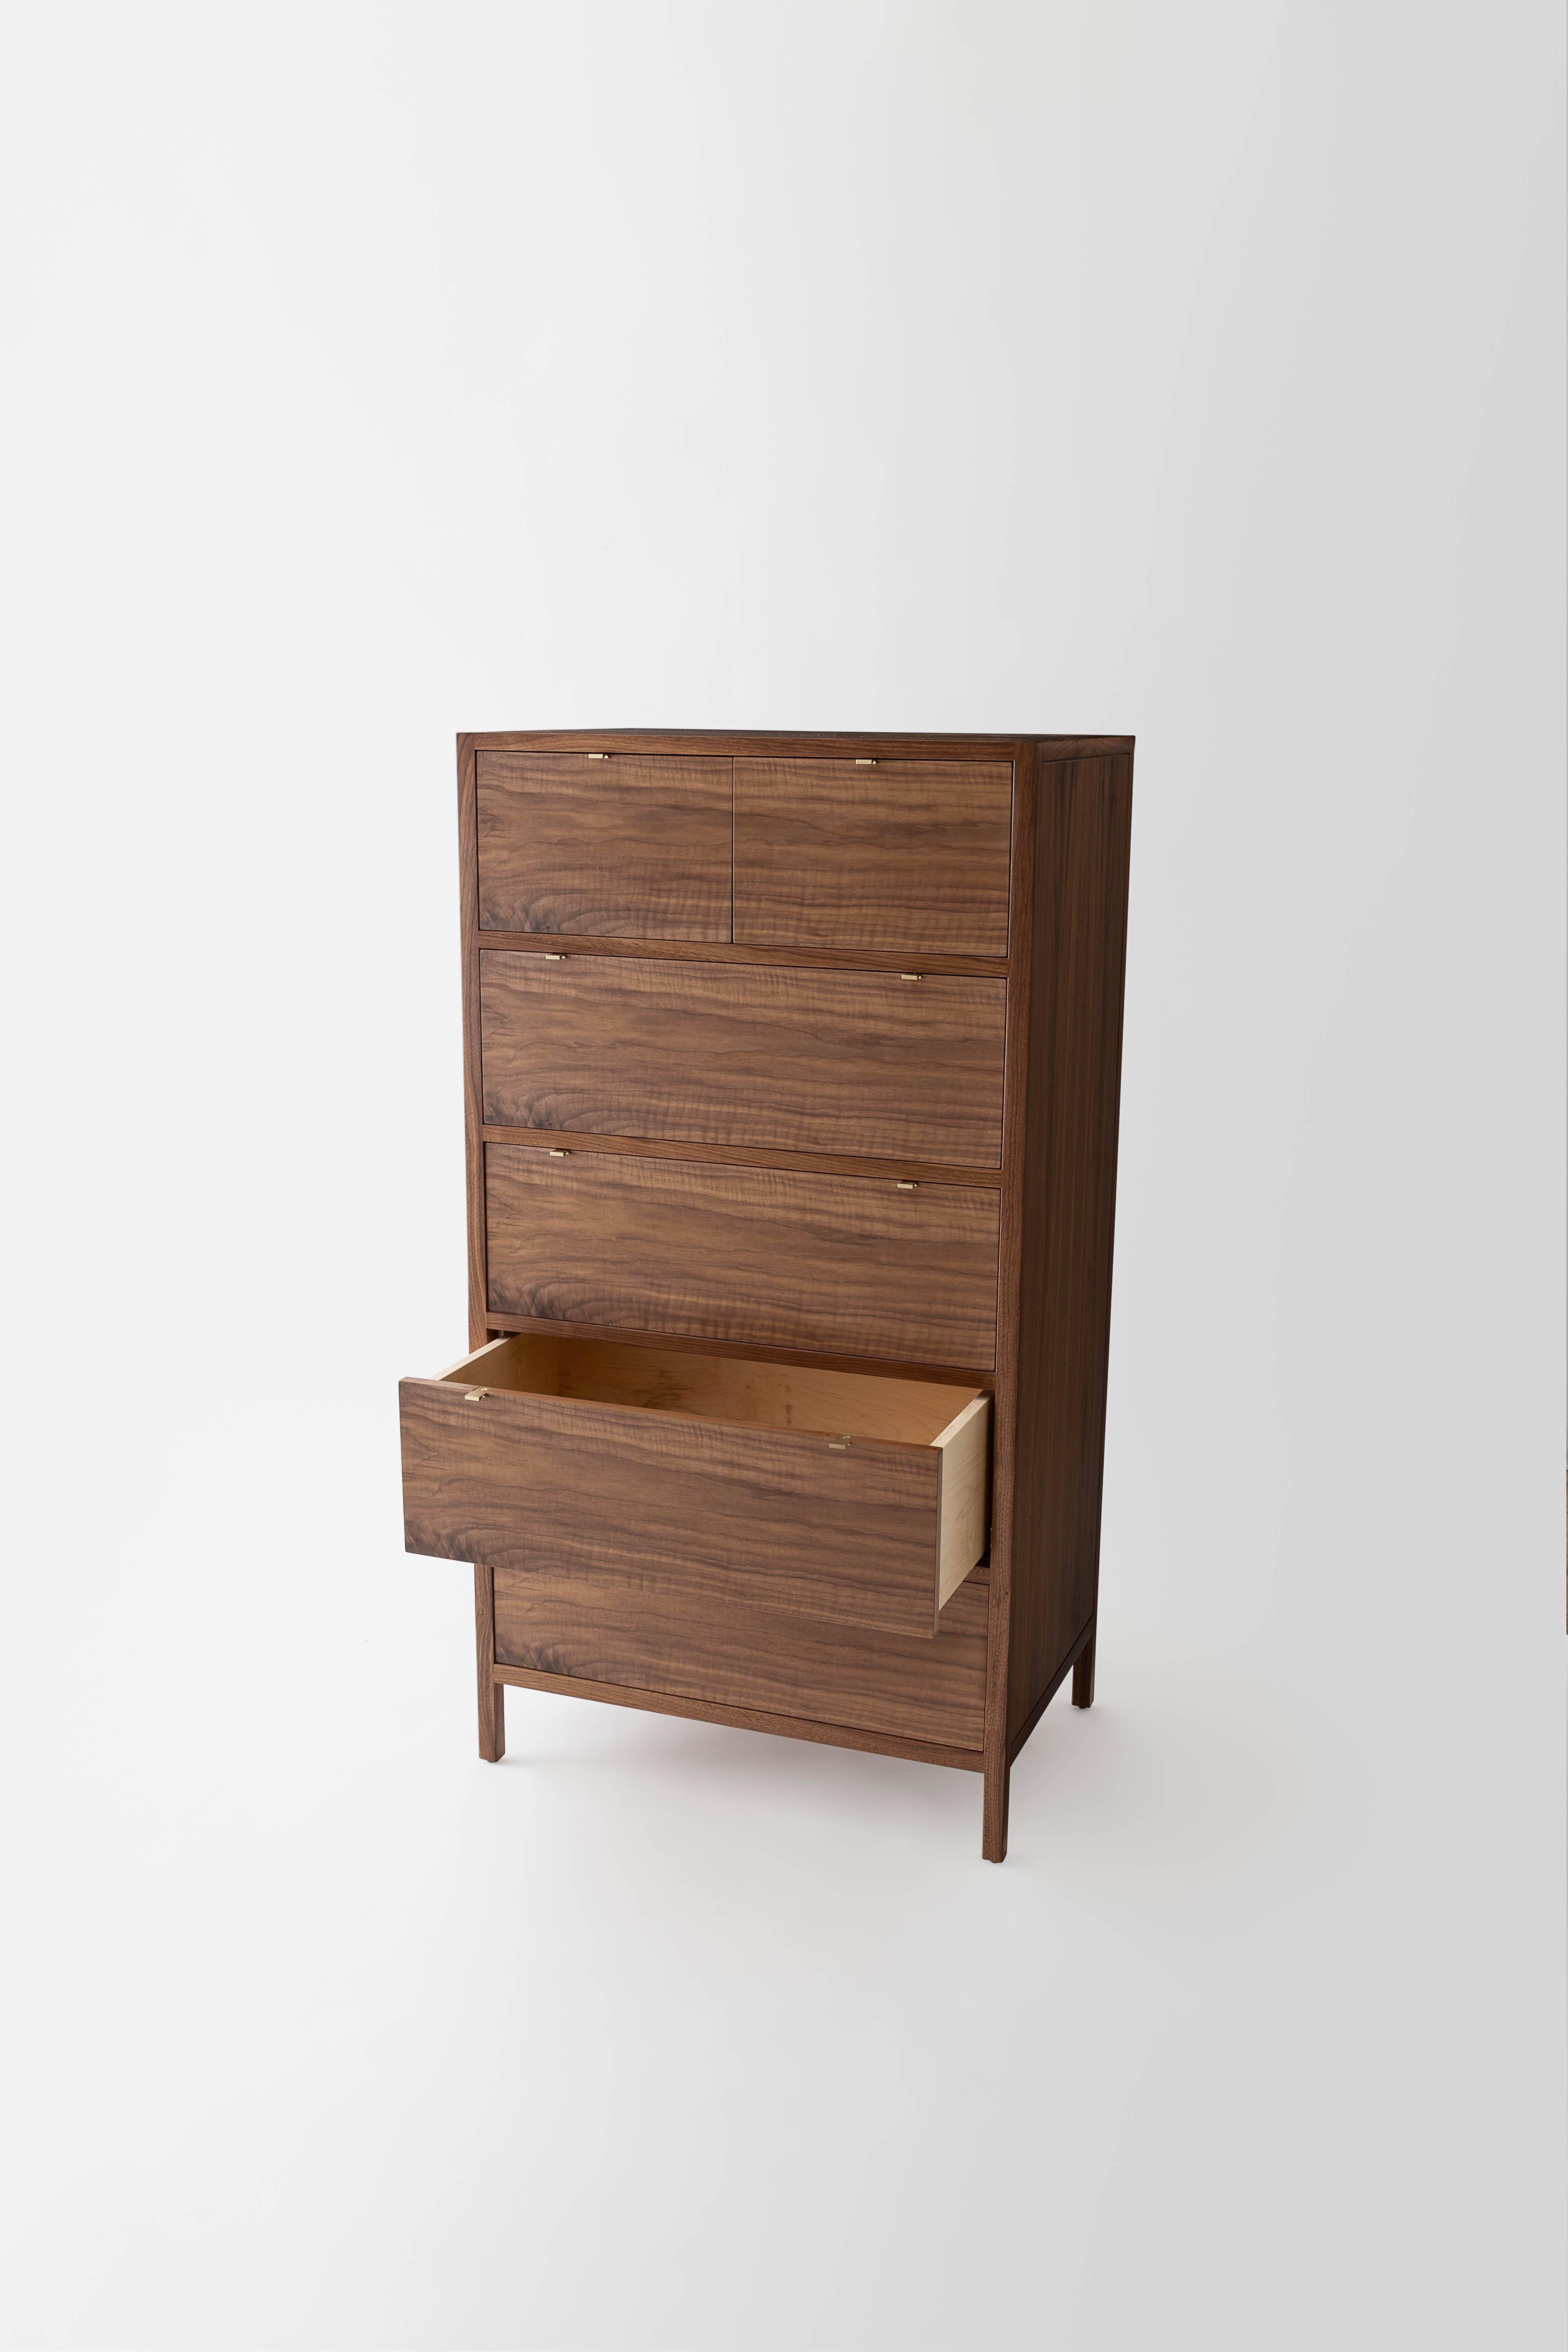 The Laska dresser is built in our Louisville, KY studio using premium hardwoods and thoughtfully selected wood veneers. This piece features custom veneered panels framed flush with solid hardwood edges and legs. Shown as a six drawer highboy